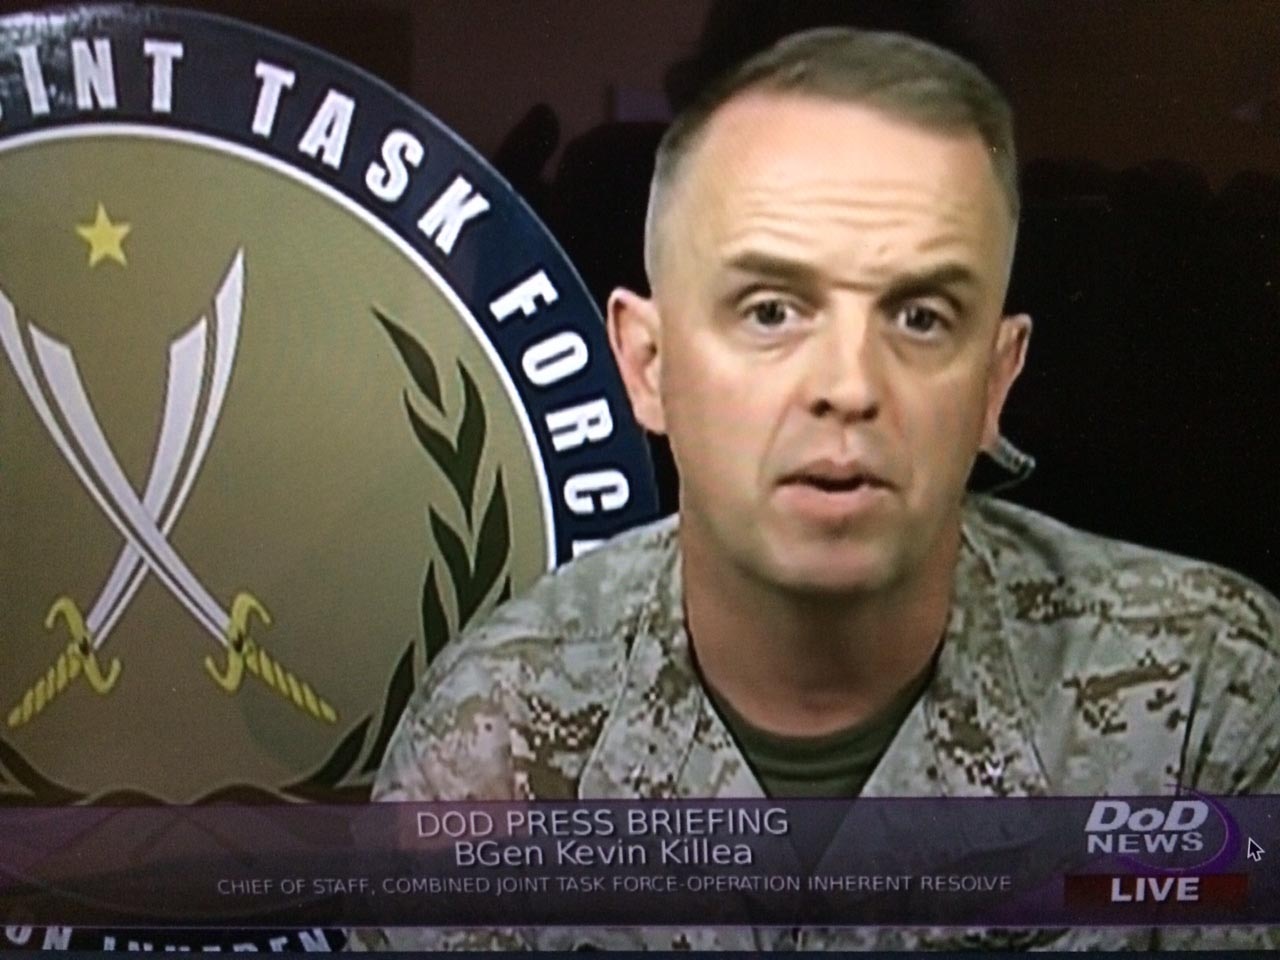 Marine Corps Brig. Gen. Kevin J. Killea, chief of staff of Combined Joint Task Force-Operation Inherent Resolve, briefed Pentagon reporters live via video teleconference from Southwest Asia, Sept. 4, 2015, on the subject of anti-ISIL operations in Iraq. DoD screen shot by Cheryl Pellerin